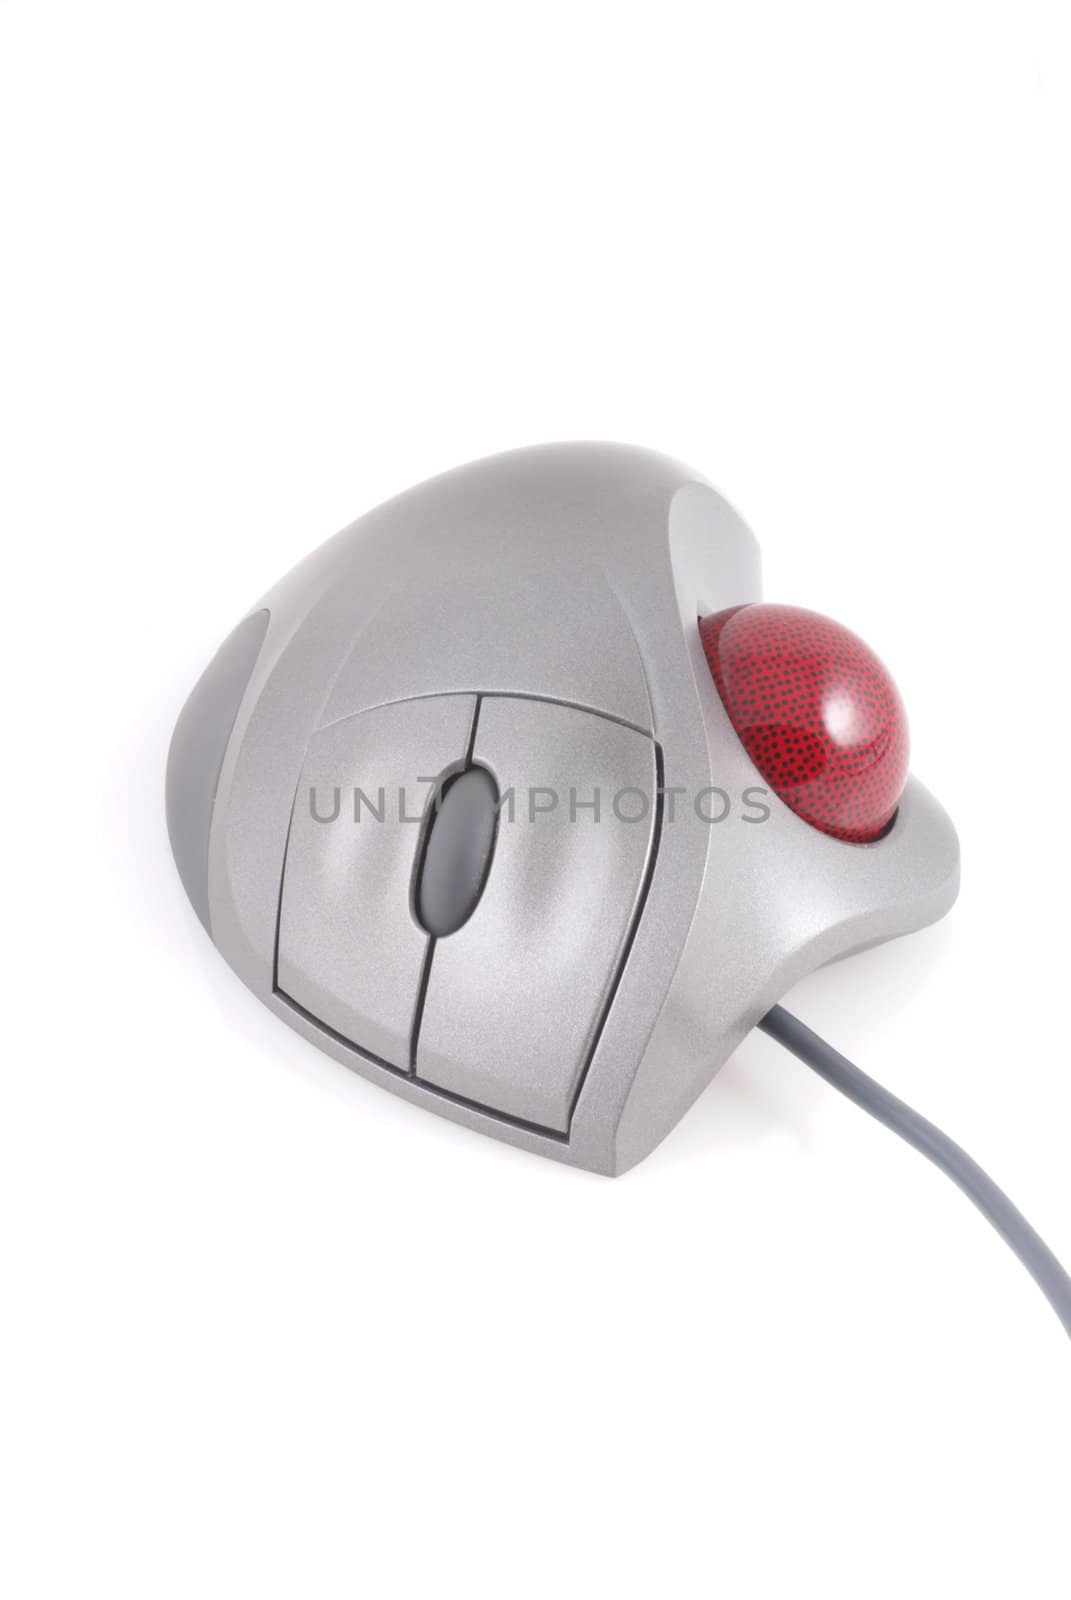 A trackball computer mouse; isolated on white.